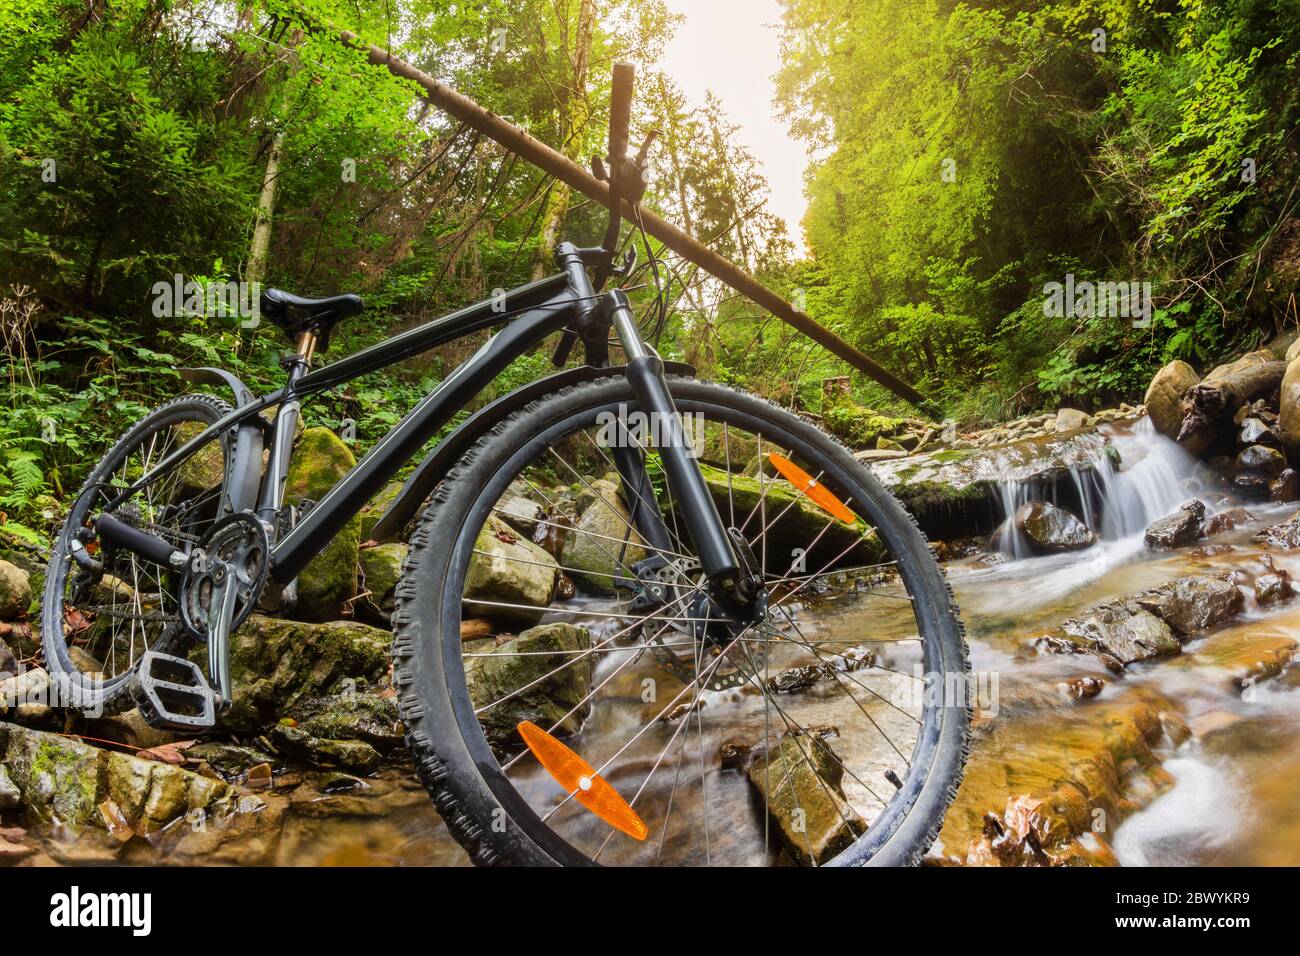 Photo of a mountain bike standing on a forest river stream landscape, wheel close-up view. Stock Photo